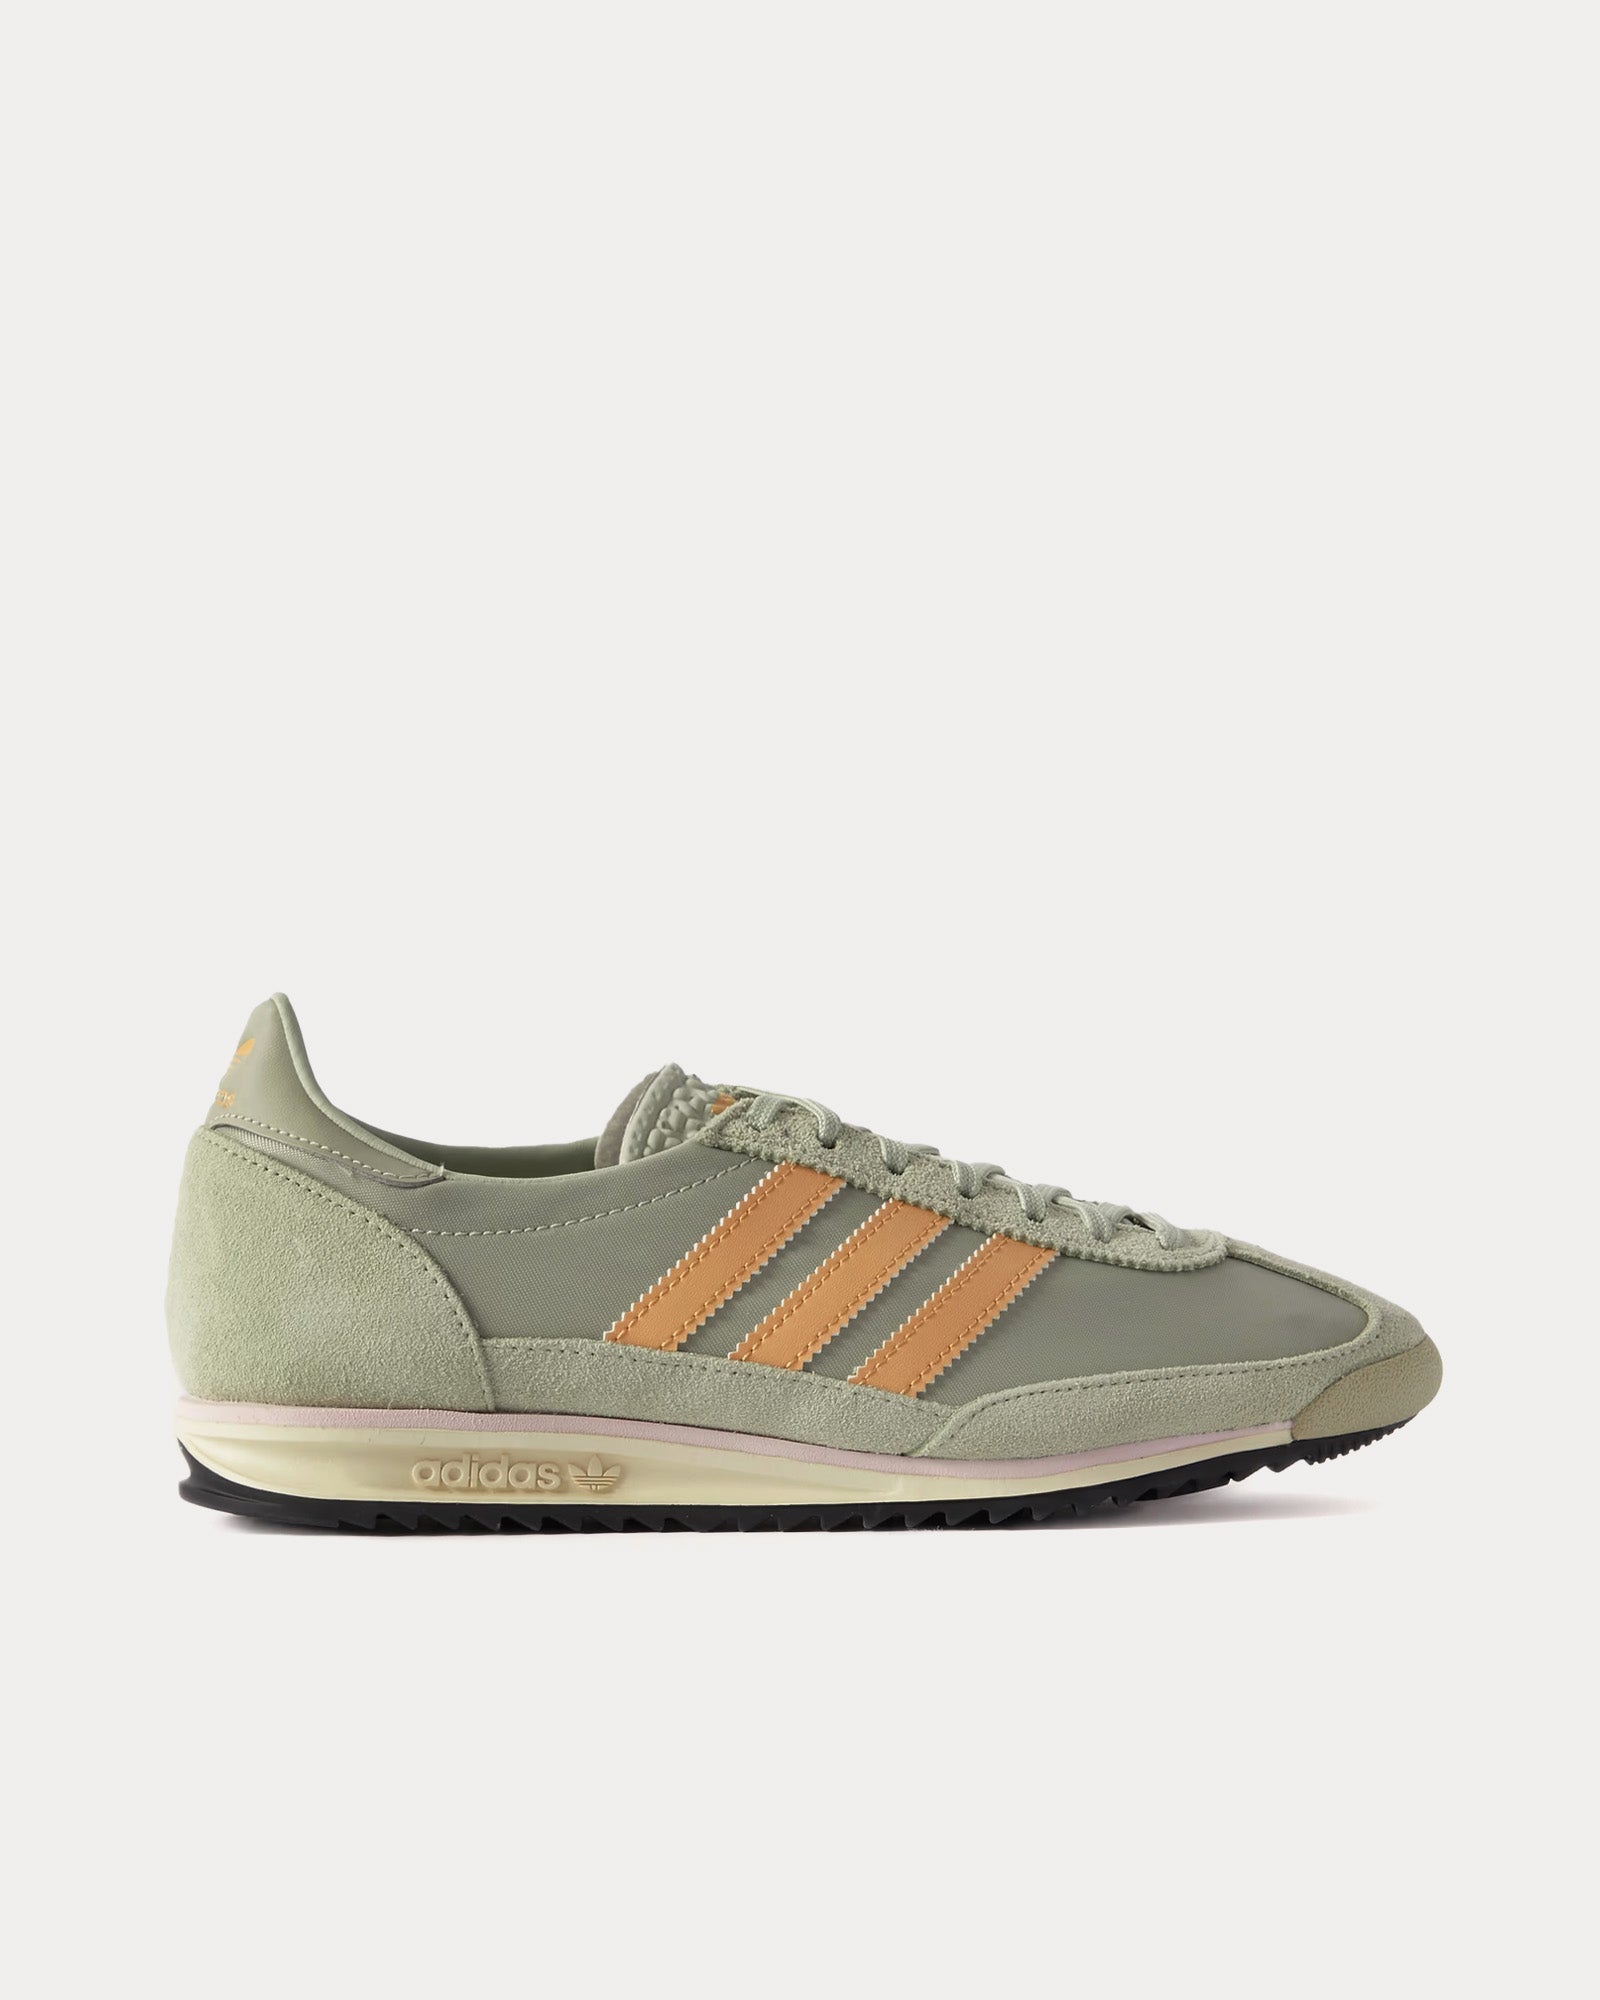 Adidas - SL 72 Light Green / Yellow Low Top Sneakers